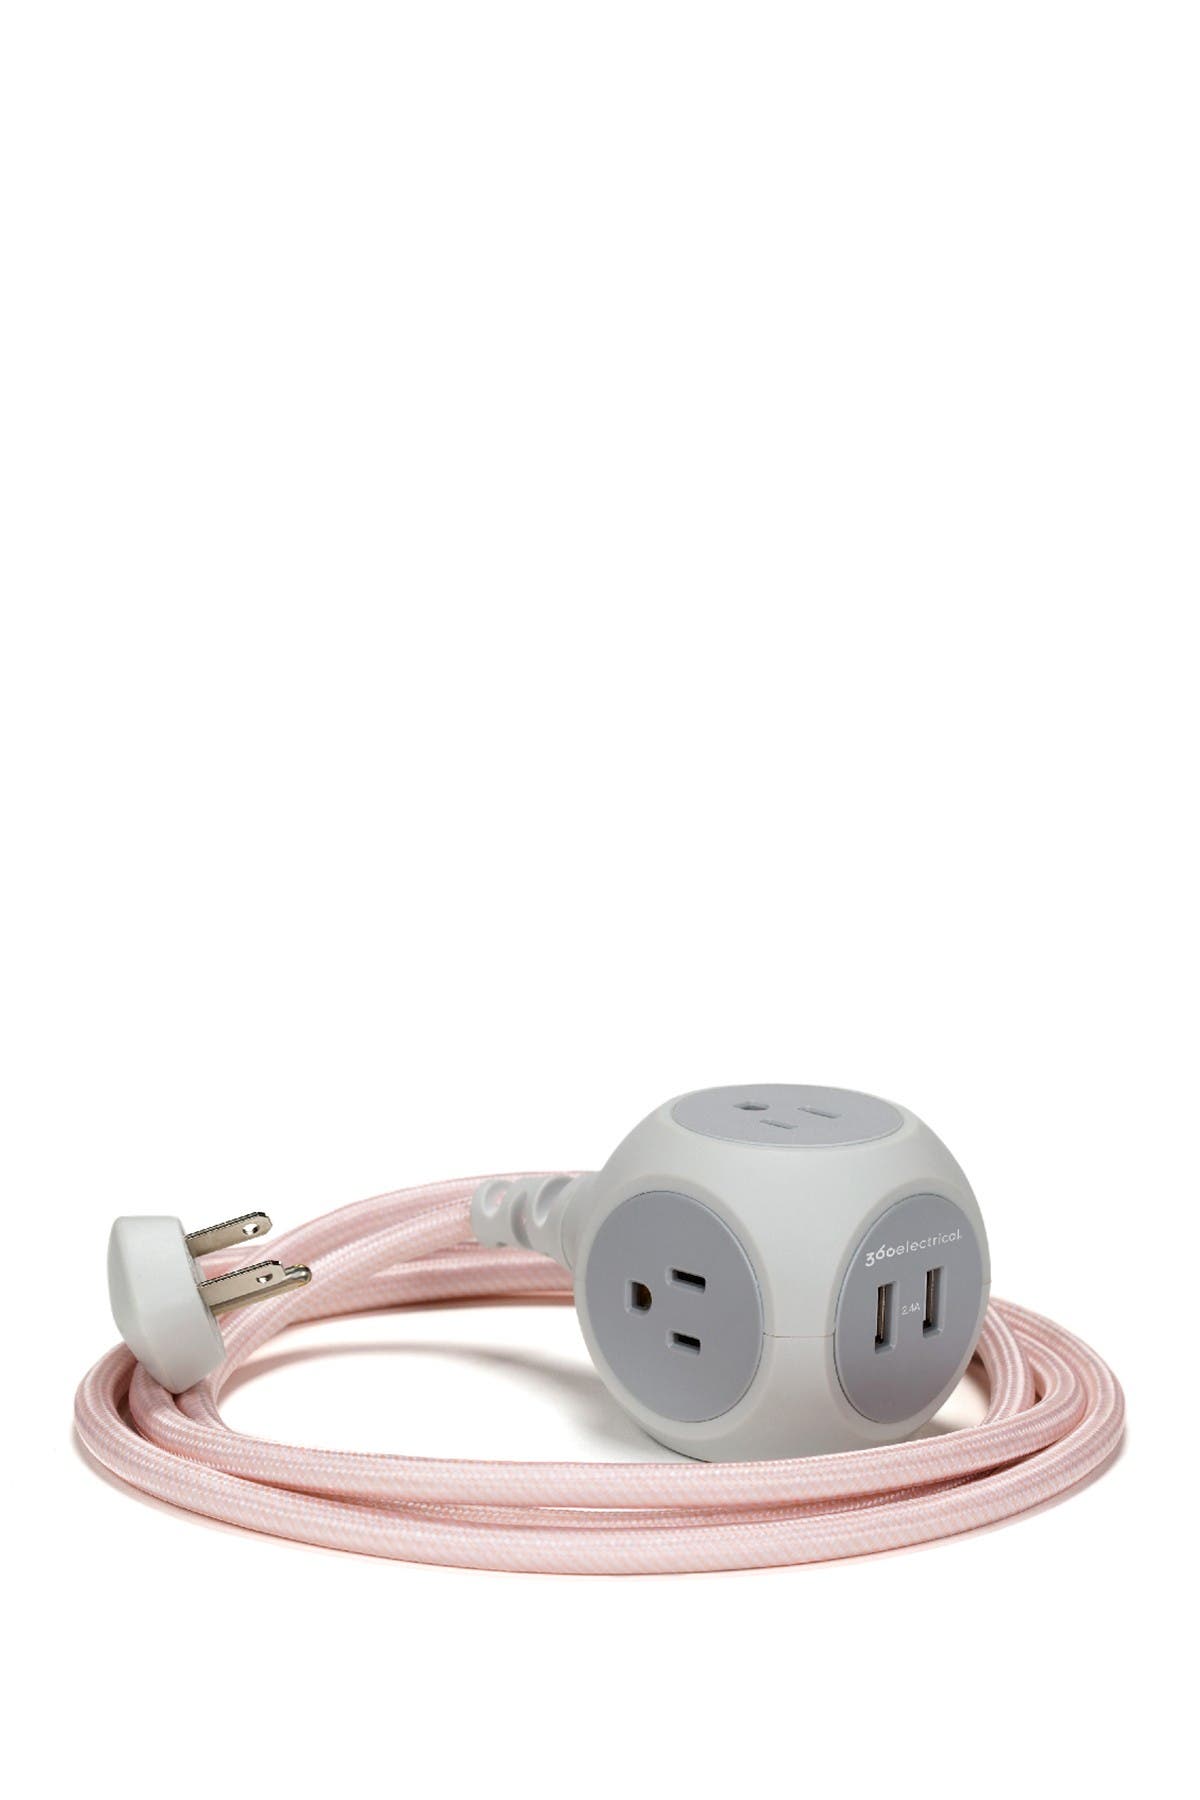 Habitat 12ft.  Braided Extension Cord In Rose Gold